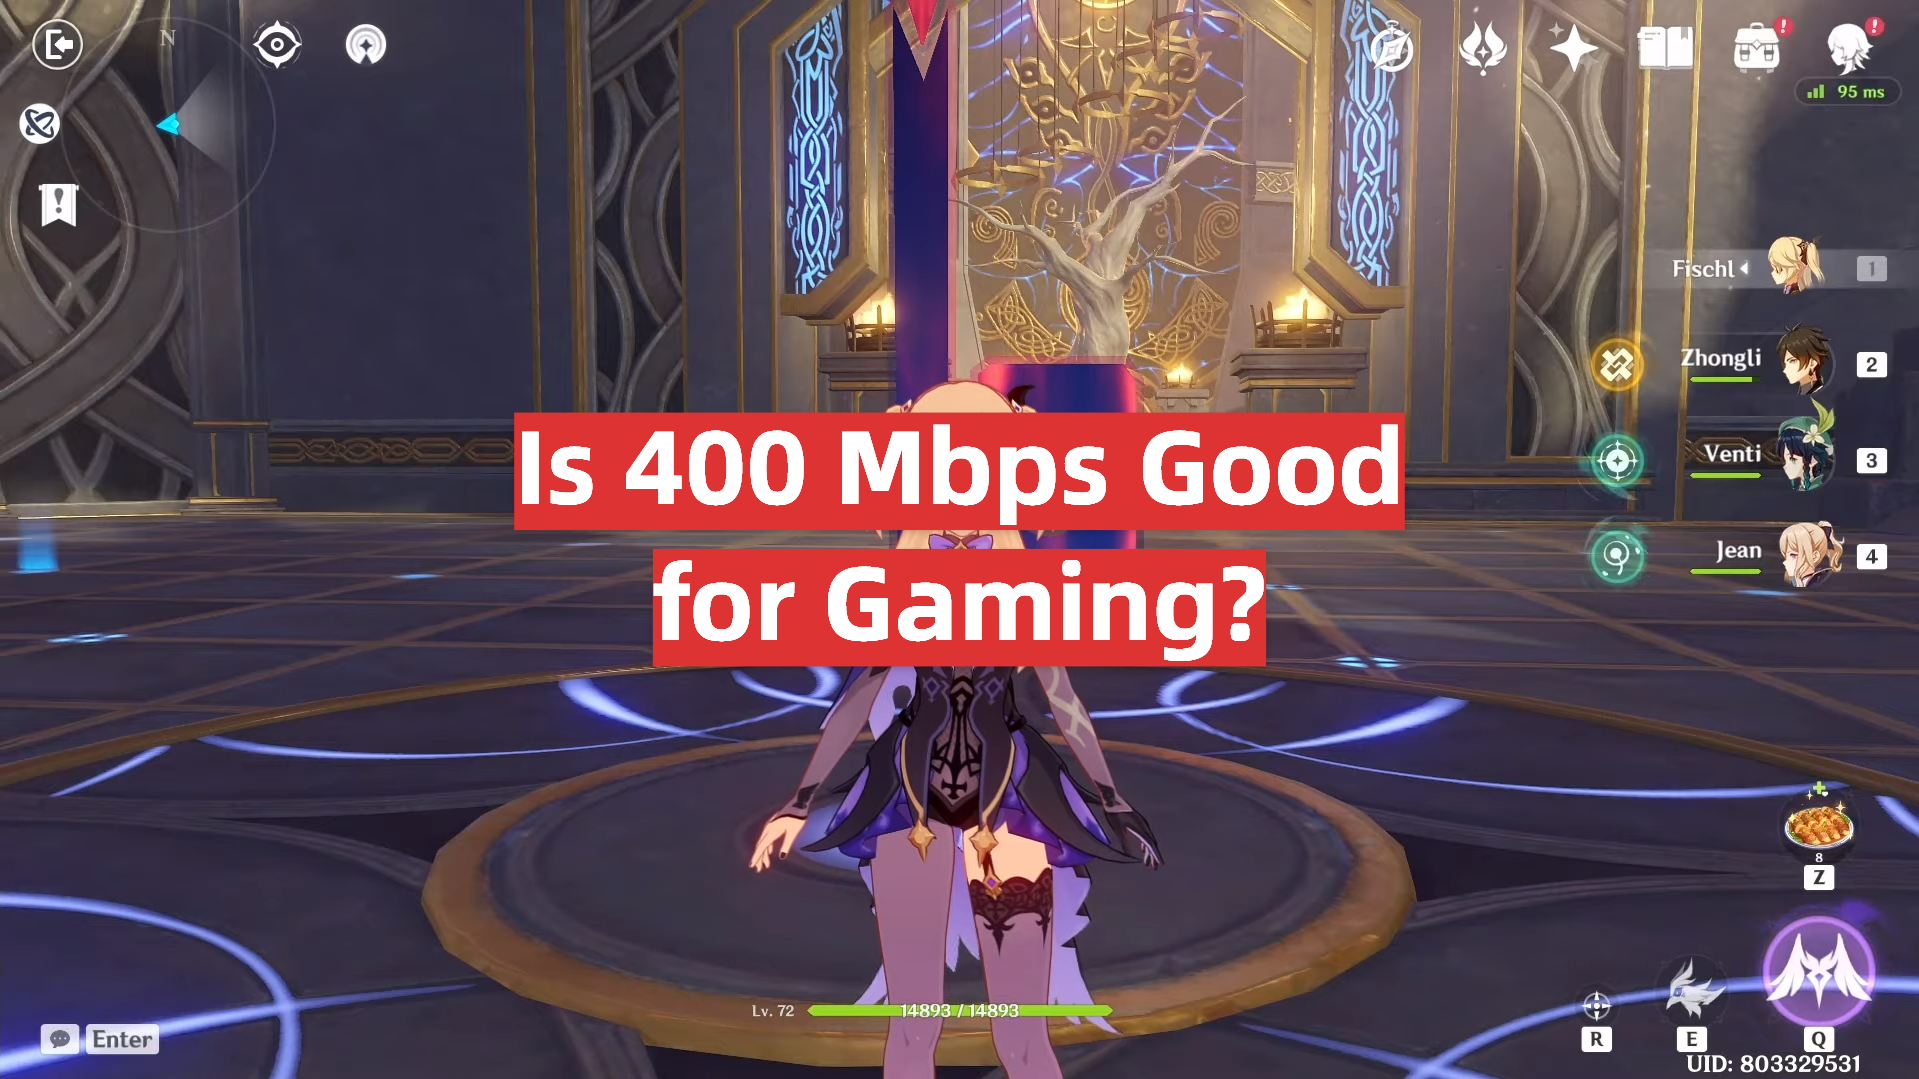 Is 400 Mbps Good for Gaming?